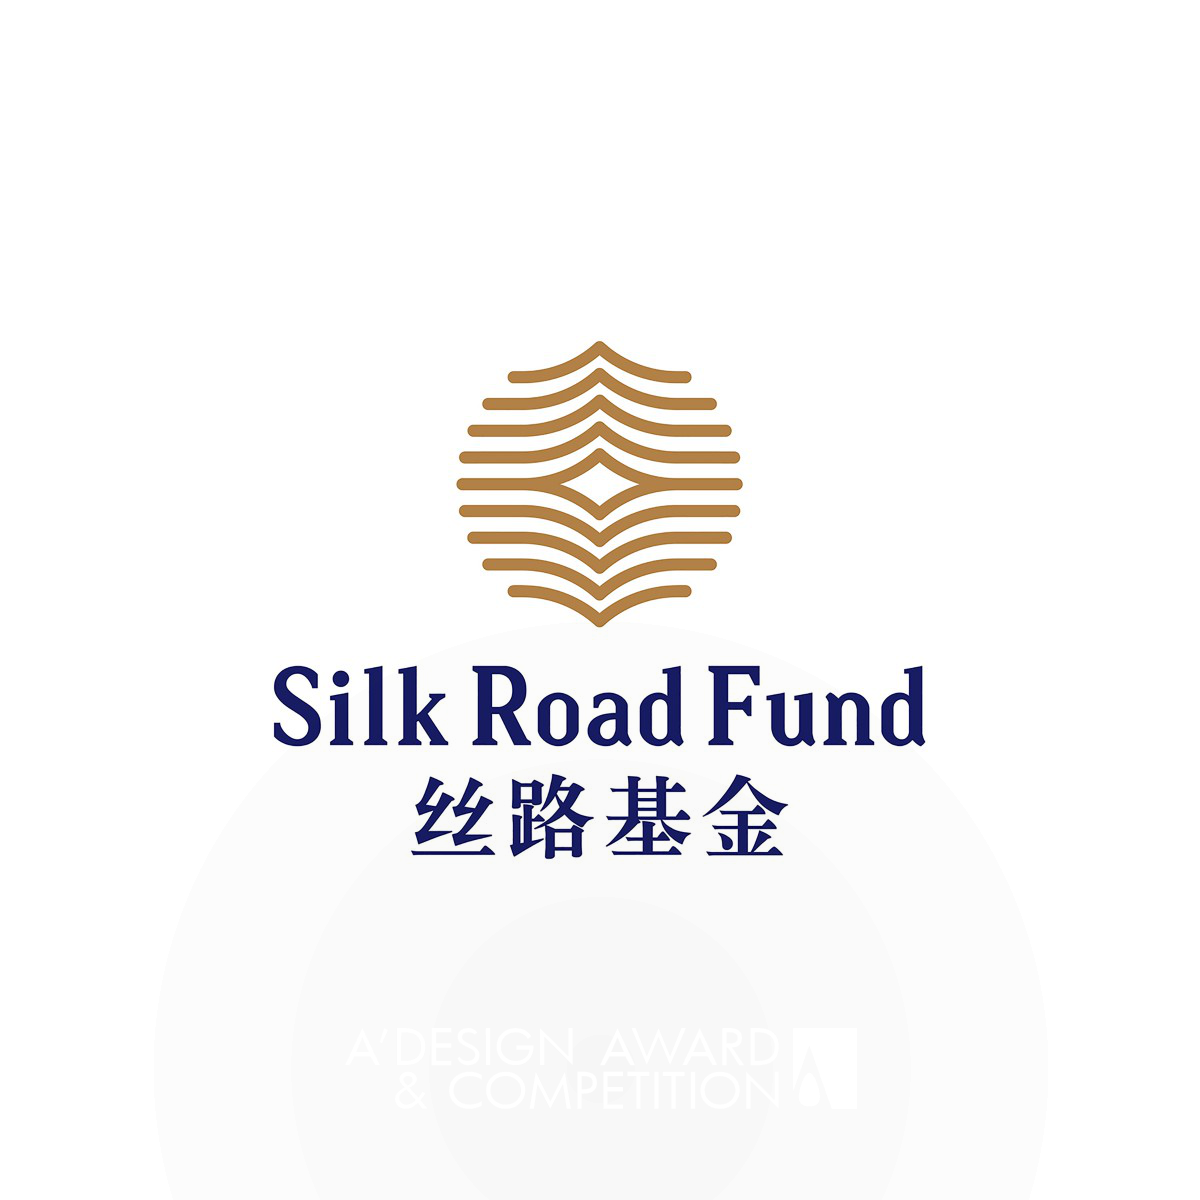 Silk Road Fund Logo and VI by Dongdao Creative Branding Group